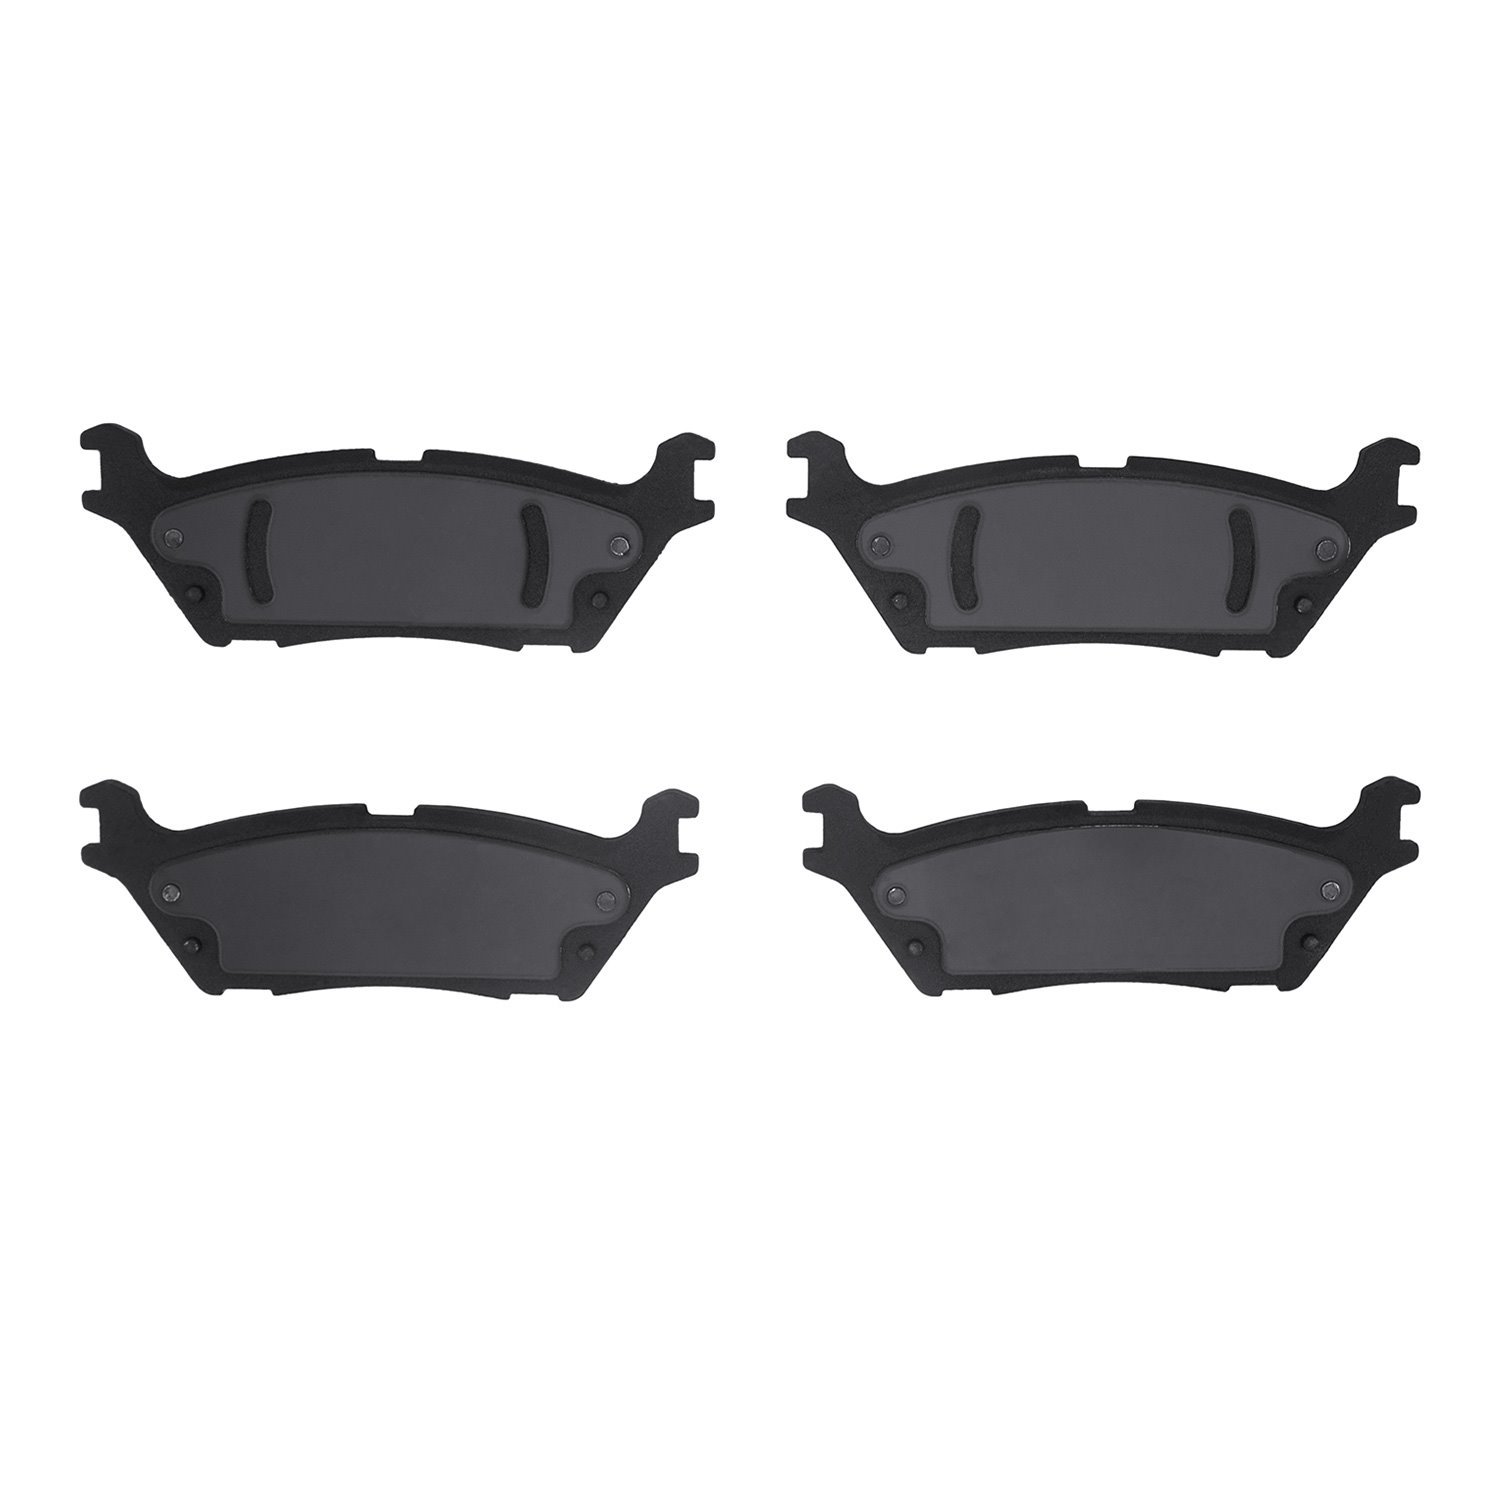 1310-2383-00 3000-Series Ceramic Brake Pads, Fits Select Ford/Lincoln/Mercury/Mazda, Position: Rear